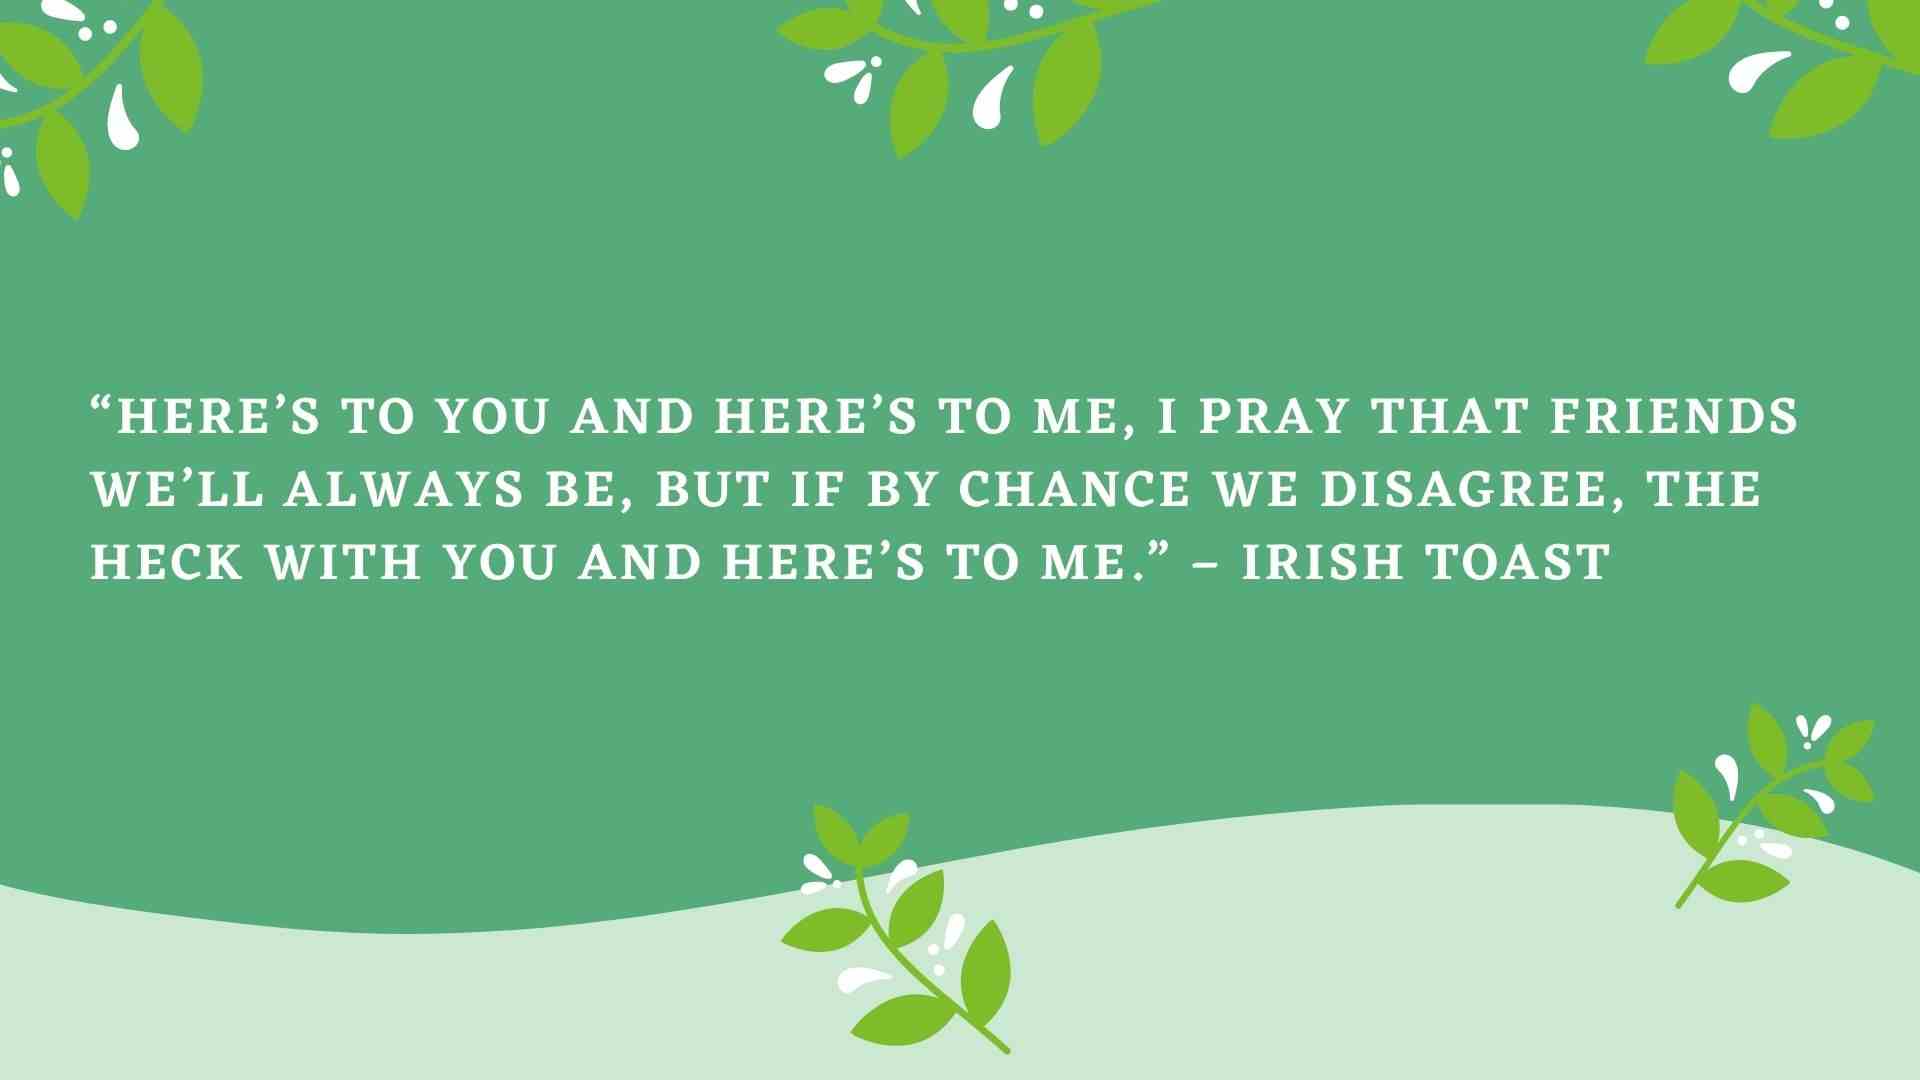 St Patricks Day 2022 Quotes | What to Write in a St Patricks Day